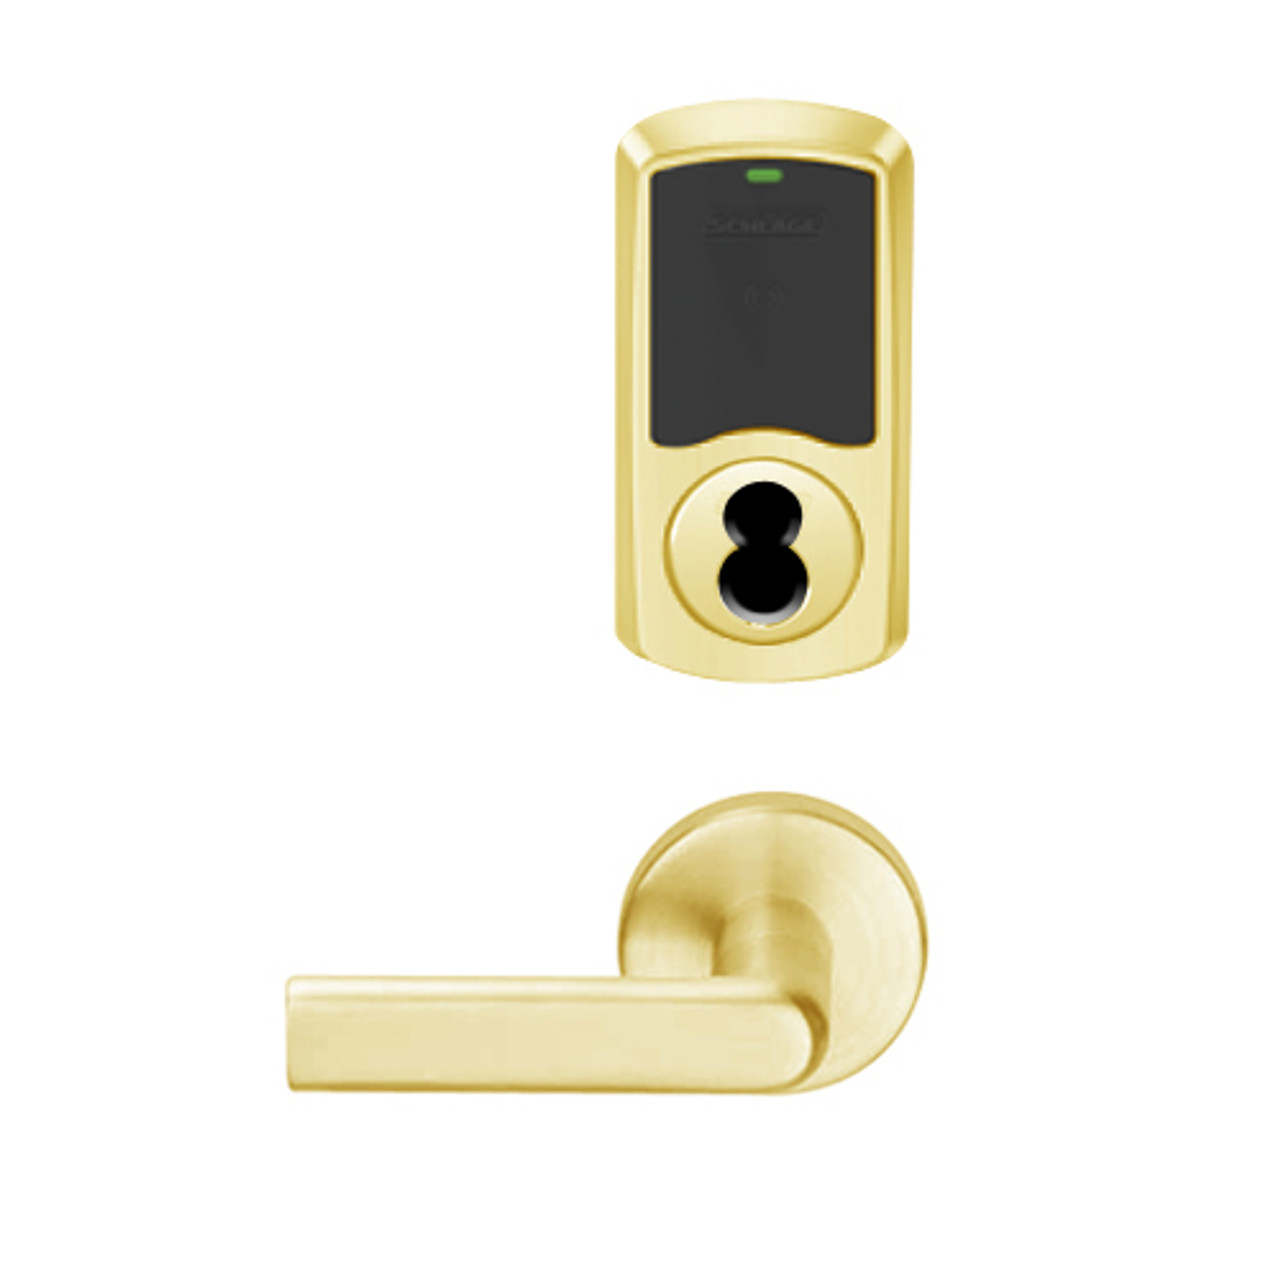 LEMB-GRW-BD-01-605-00B Schlage Privacy/Office Wireless Greenwich Mortise Lock with Push Button & LED Indicator and 01 Lever Prepped for SFIC in Bright Brass